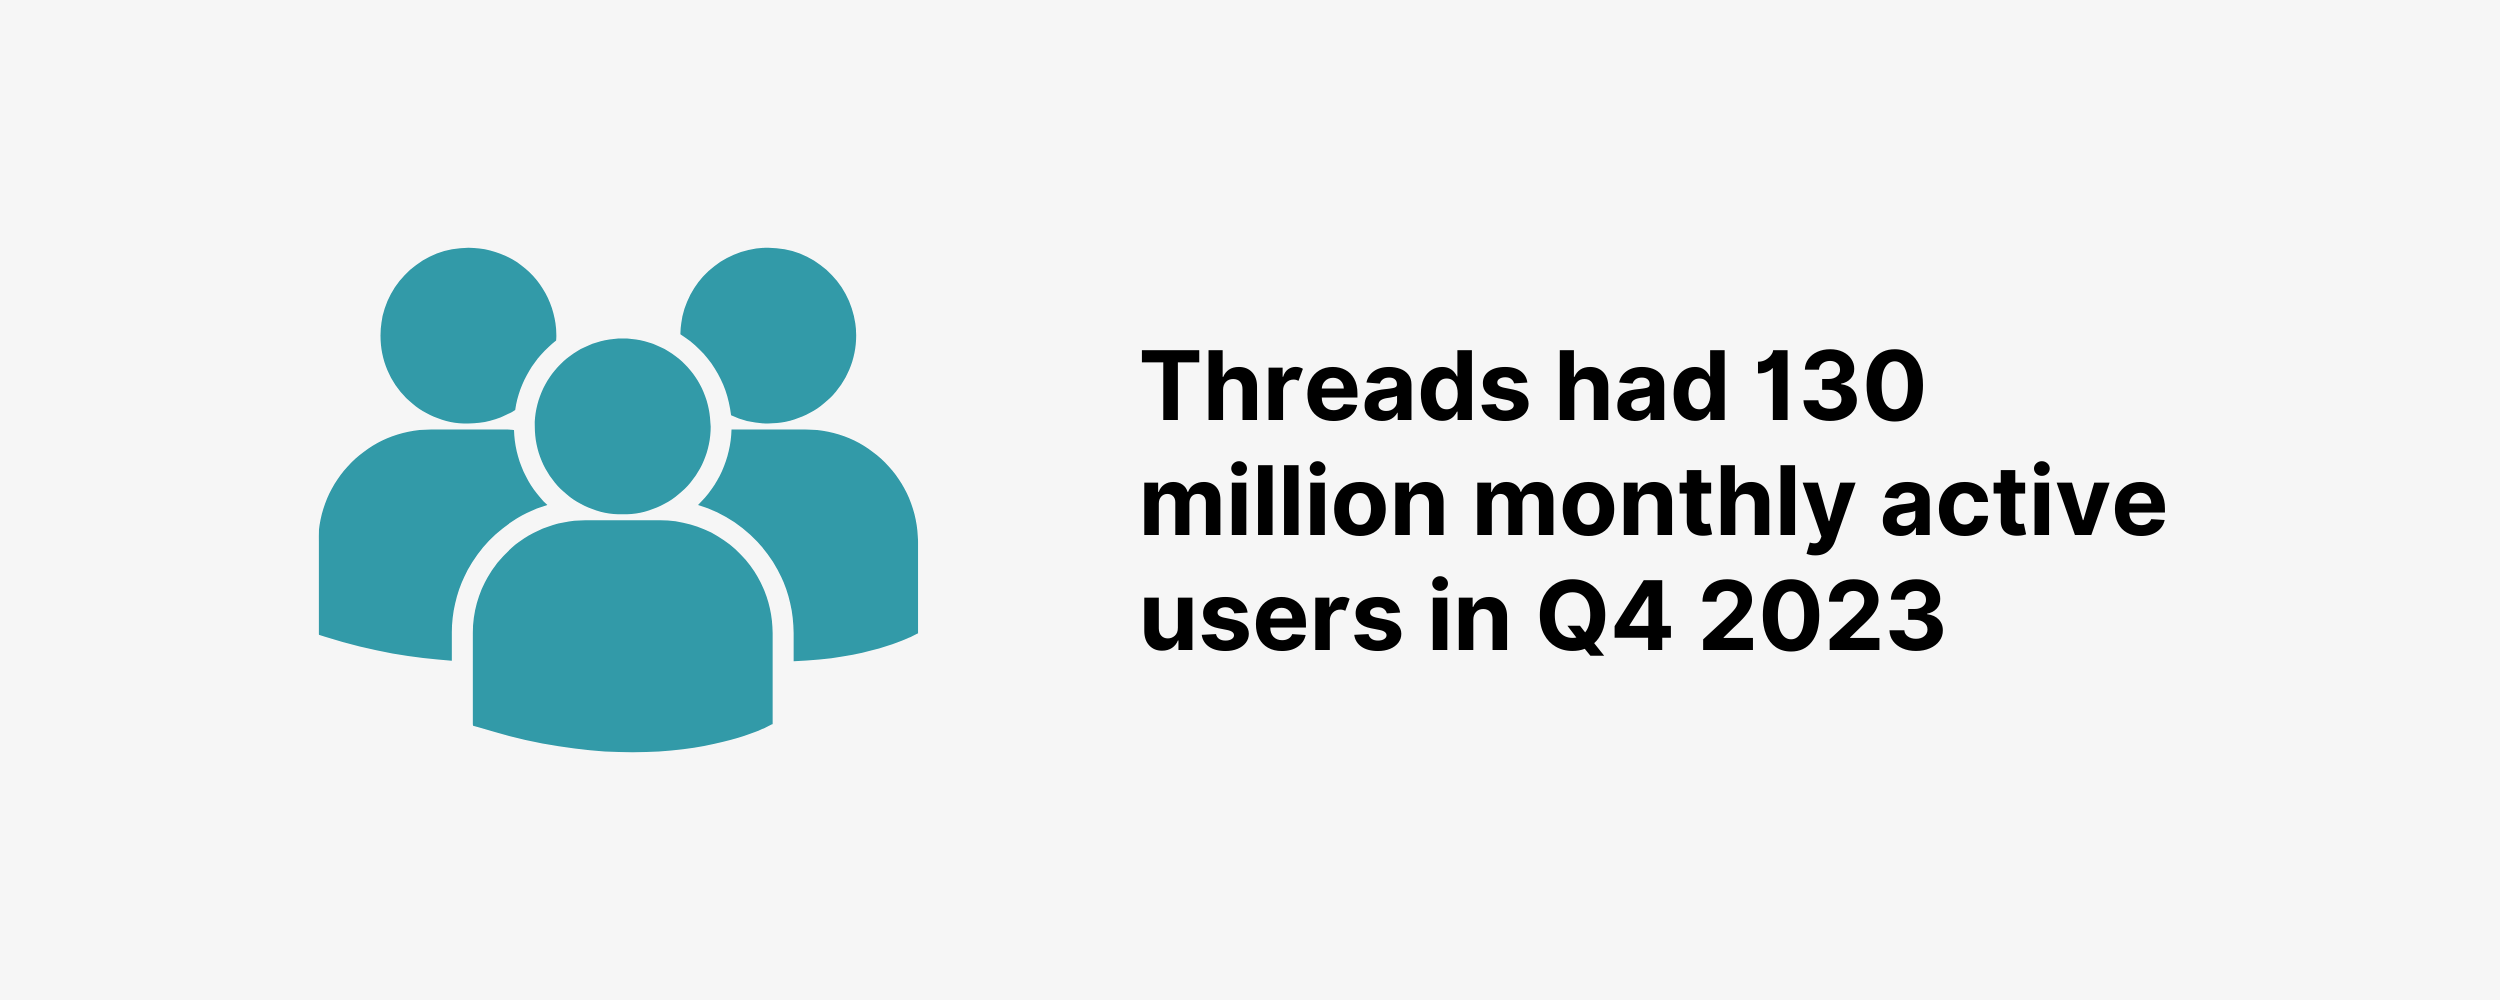 Threads had 130 million monthly active users in Q4 2023